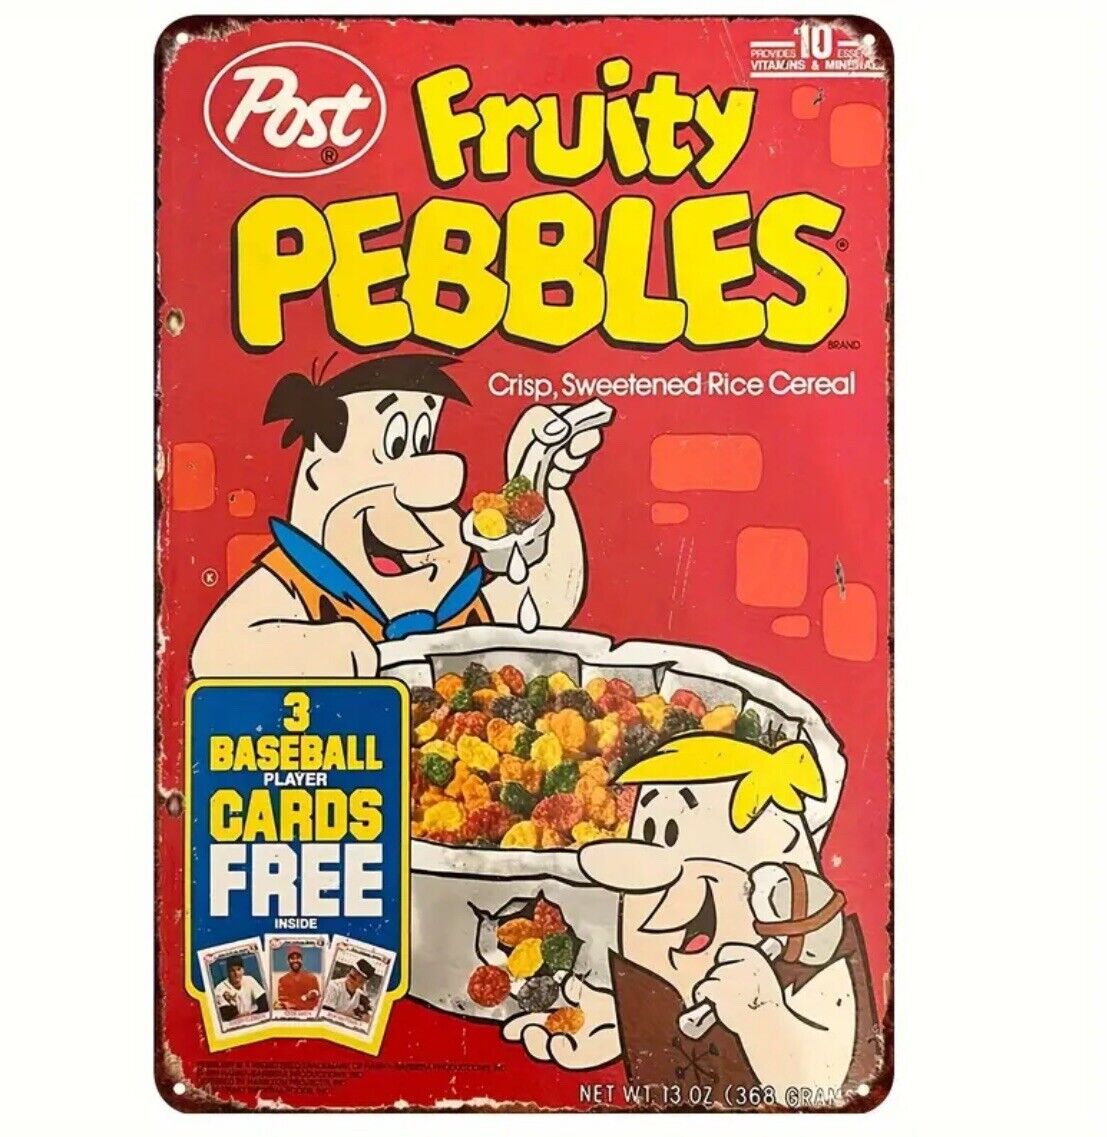 1990 Vintage FRUITY PEBBLES BASEBALL CARDS Metal Tin Sign 12x8 Inches